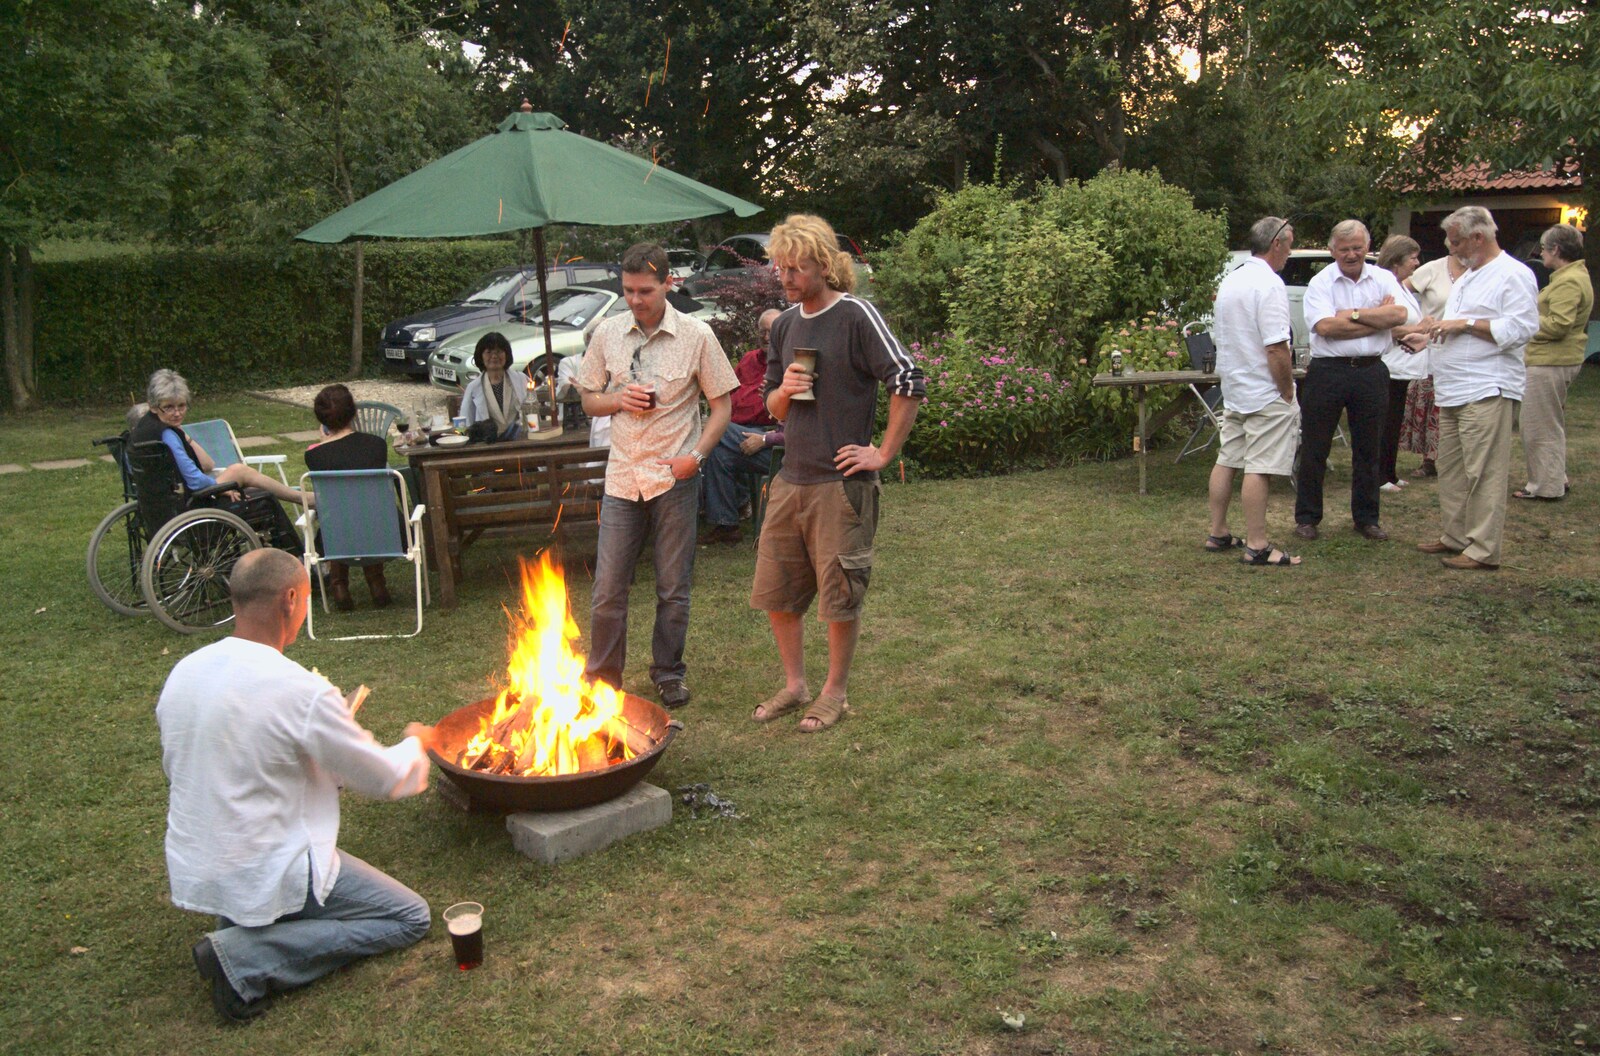 Nigel and Gail's Anniversary Bash, Thrandeston Great Green, Suffolk - 24th July 2010: Outside, the fire is appreciated